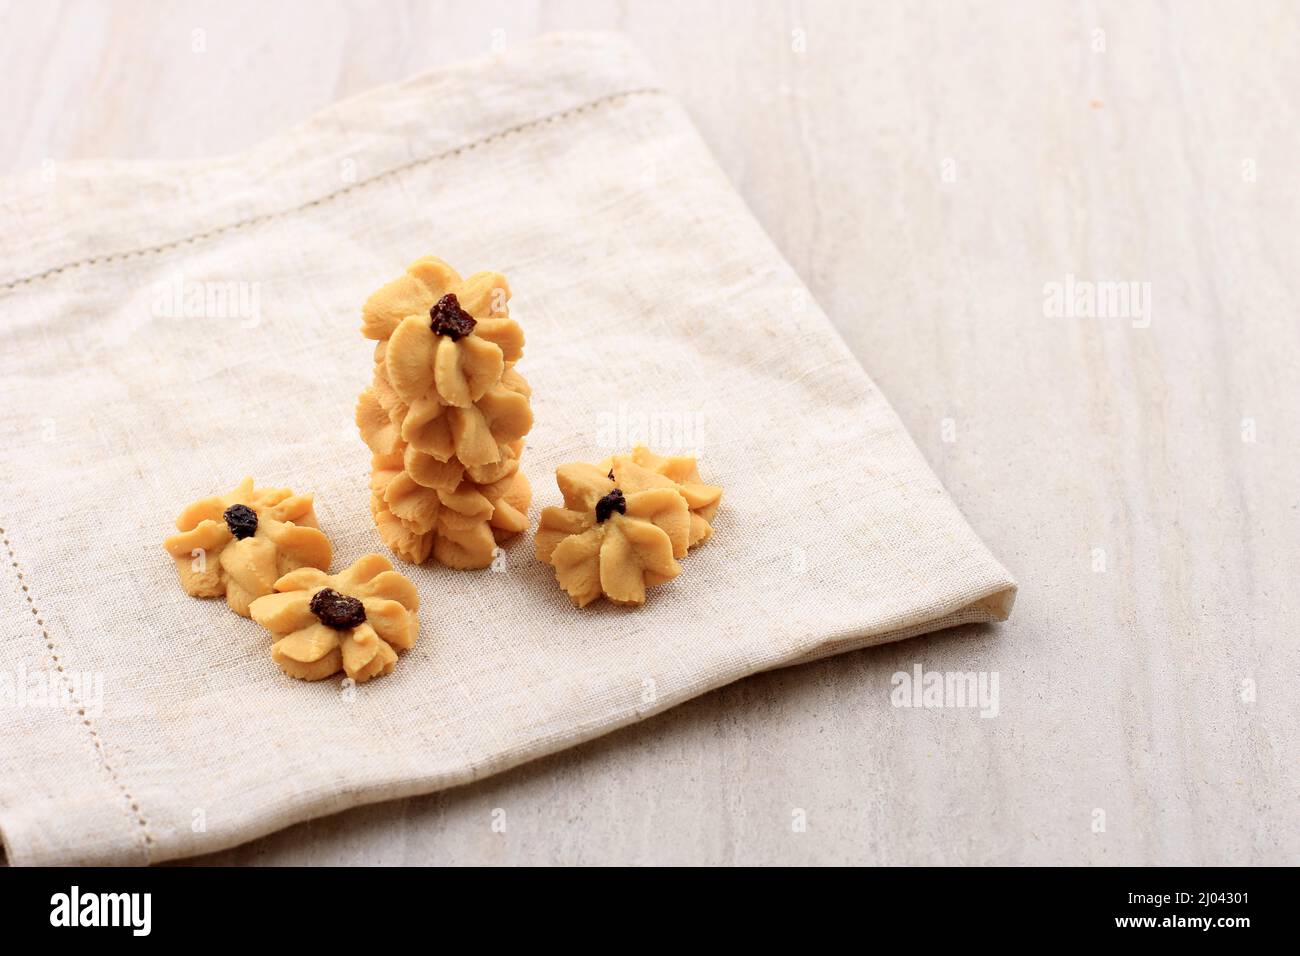 Kue Semprit, Indonesian Traditiona Cookies Served to Celebrate Lebaran  Idul Fitri Ied Mubarak. Made from Butter, Flour, Egg, with Flower Shape. Copy Stock Photo